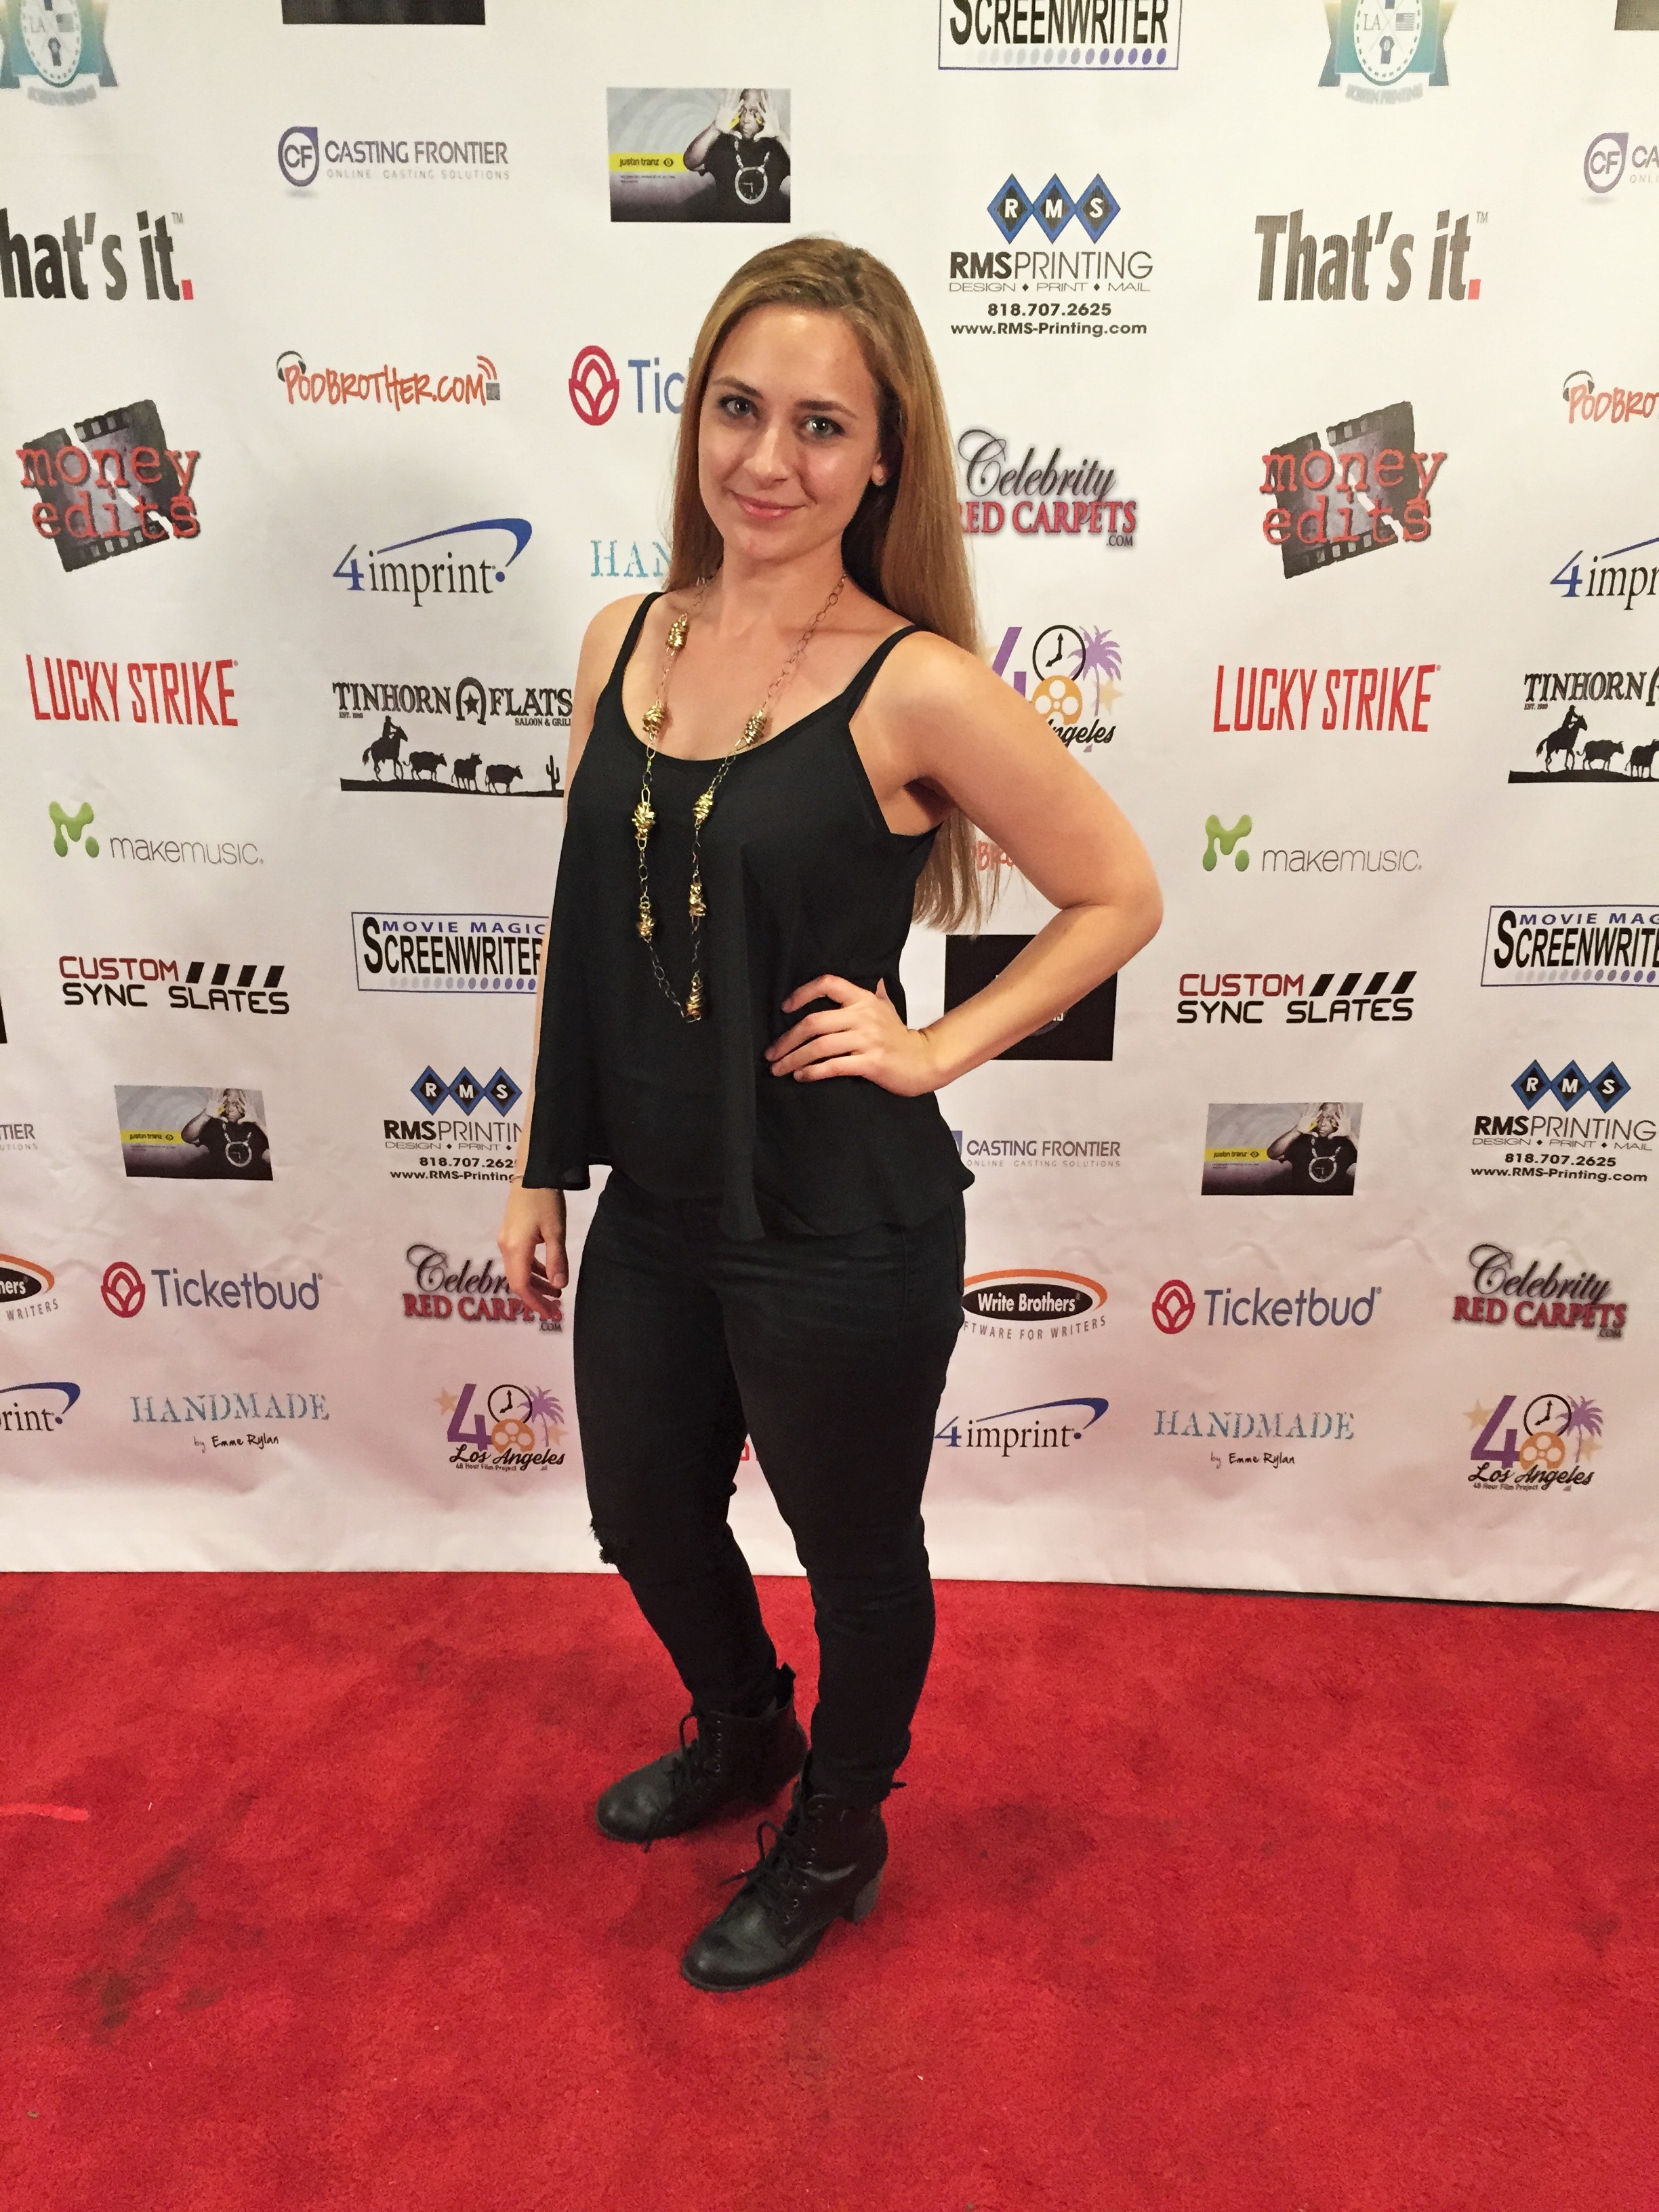 Red Carpet at the Premiere of 